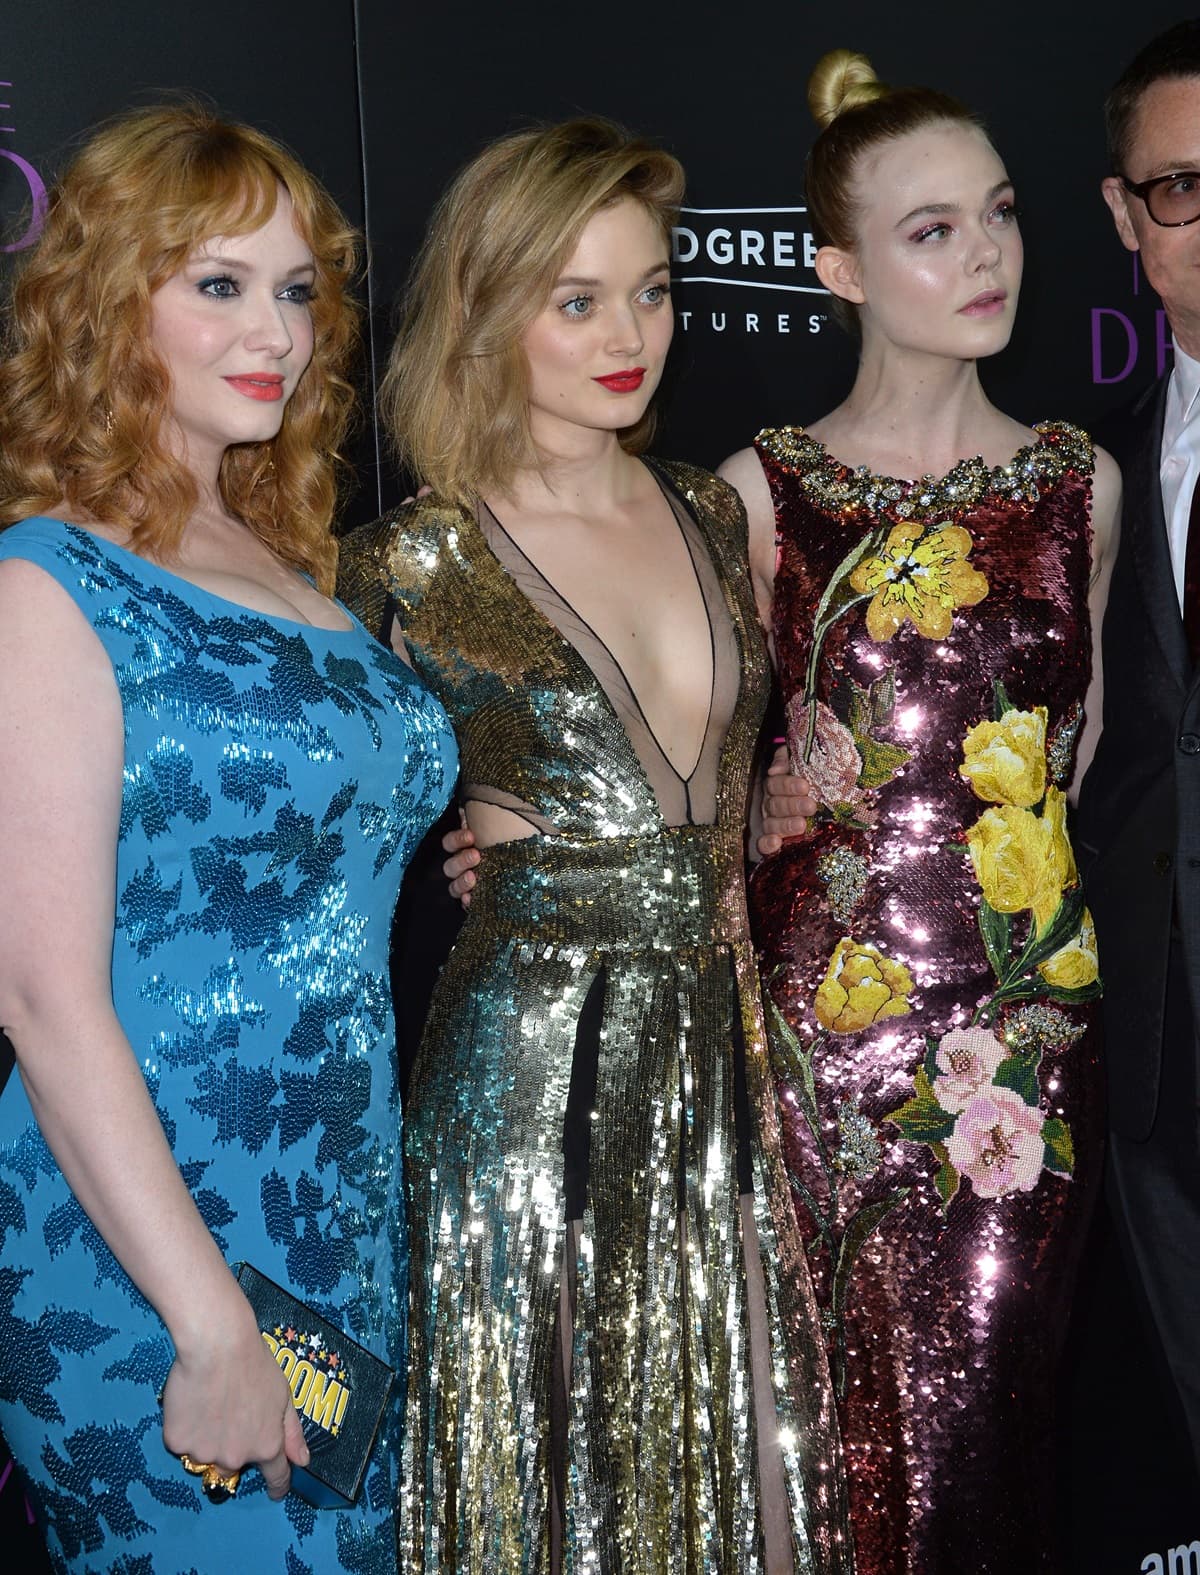 Among the three, Elle Fanning is the tallest at 5ft 8 ½ (174 cm), followed by Christina Hendricks at 5ft 7 (170.2 cm), while Bella Heathcote stands at 5ft 6 (167.6 cm)